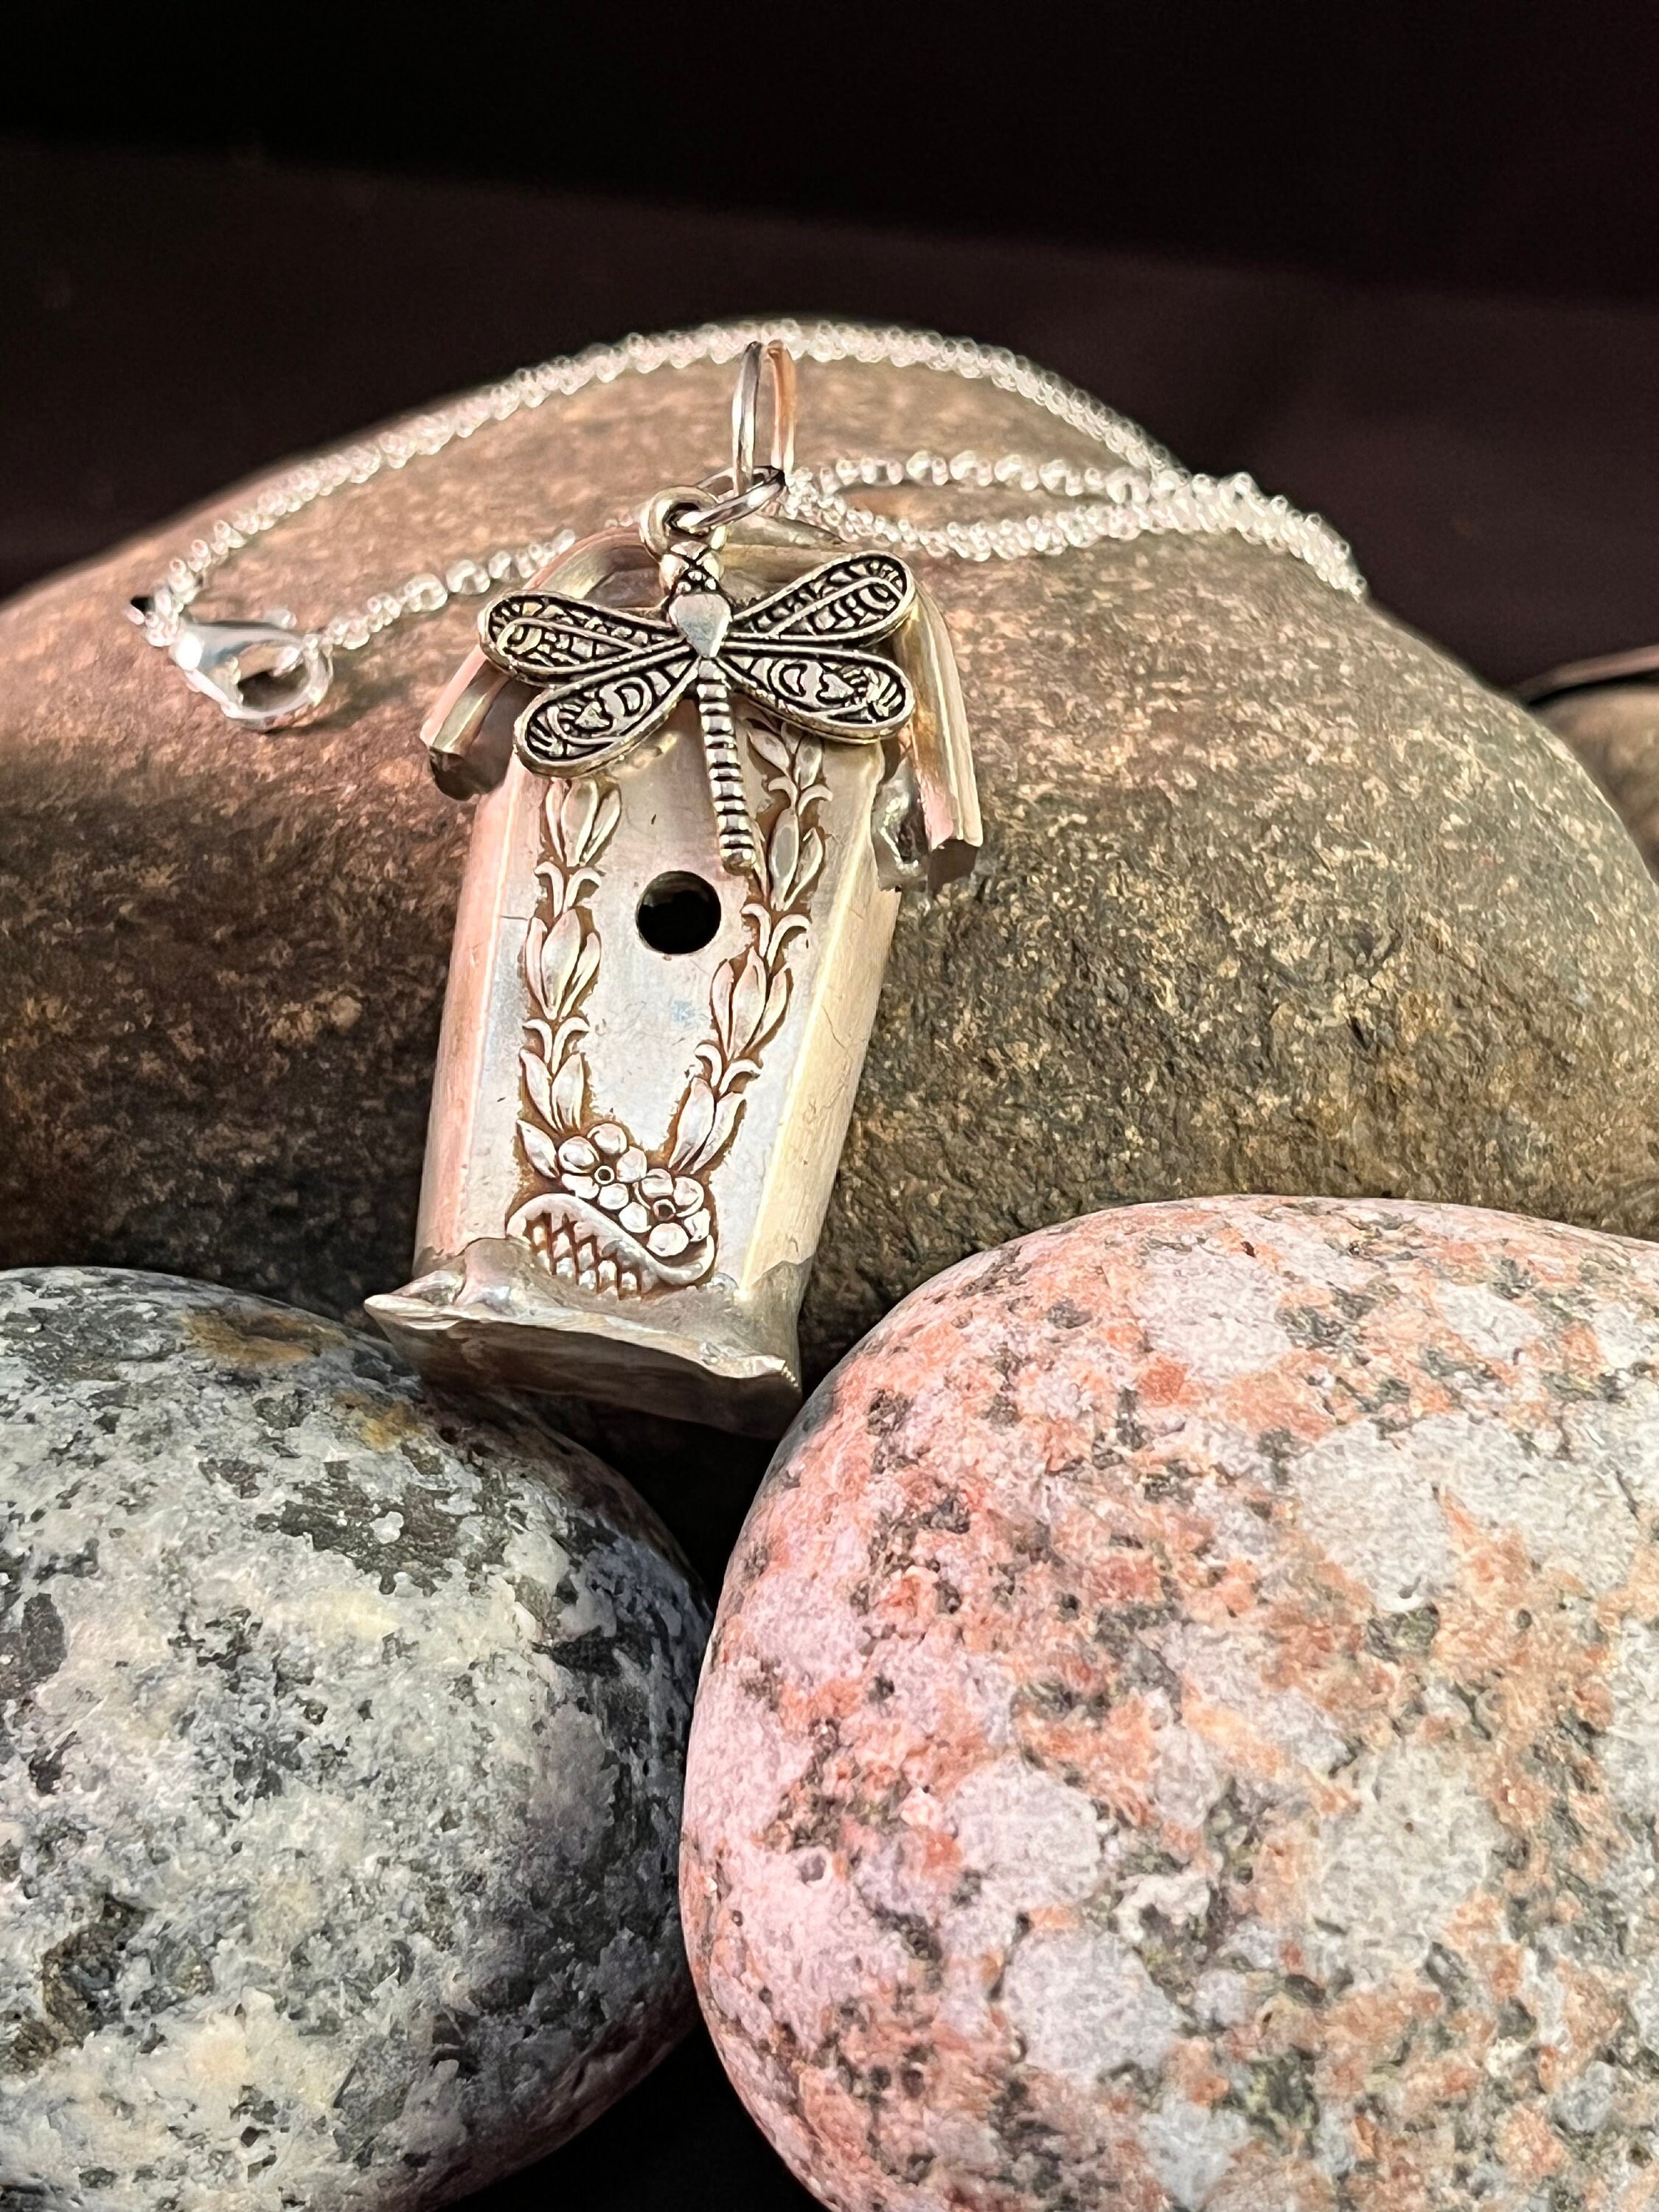 Vintage Silverware Birdhouse Pendant With Dragonfly Charm - Etsy